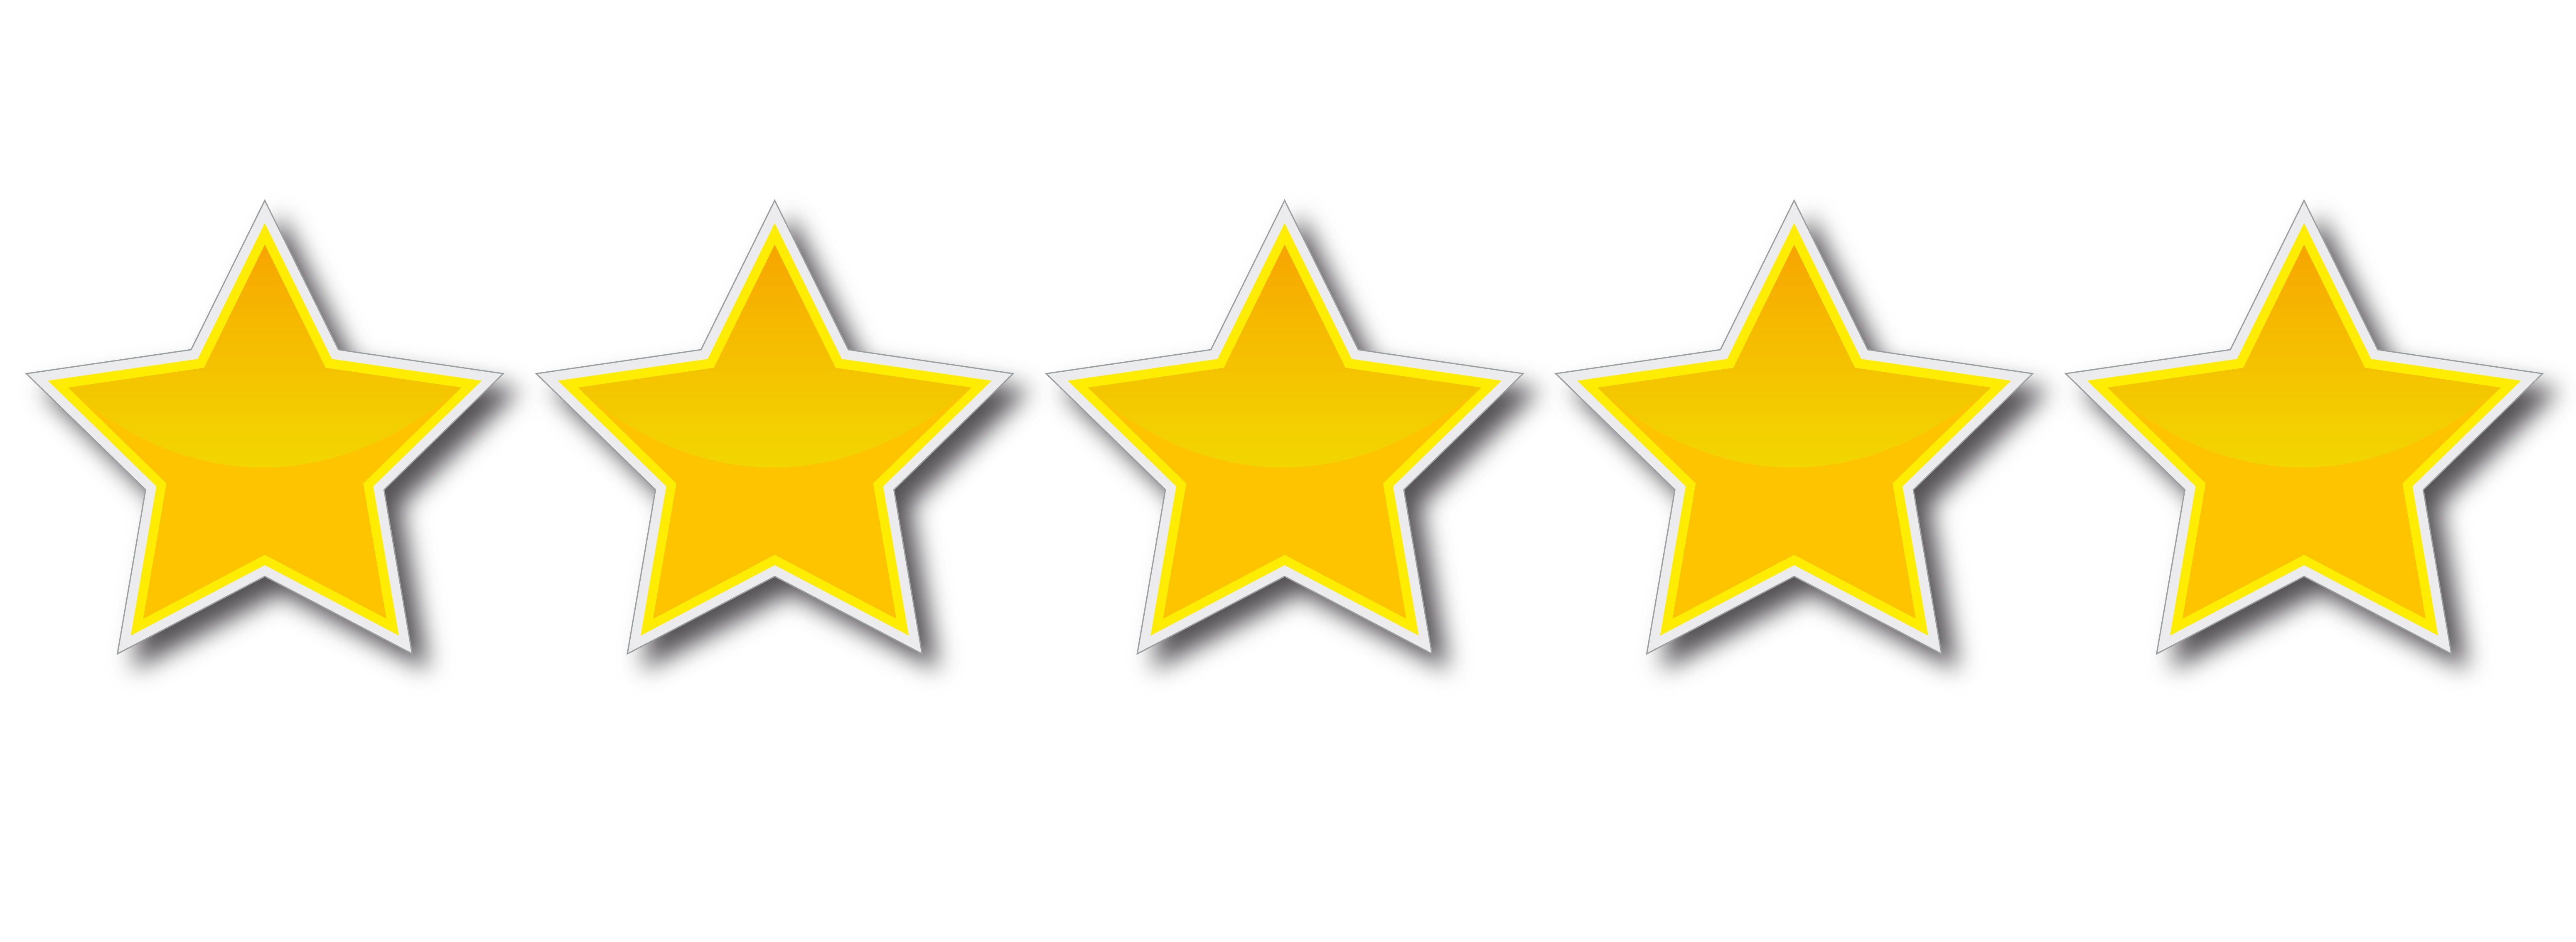 Top Seven Points to Get Five Star Review for Your Mobile App - Image 1